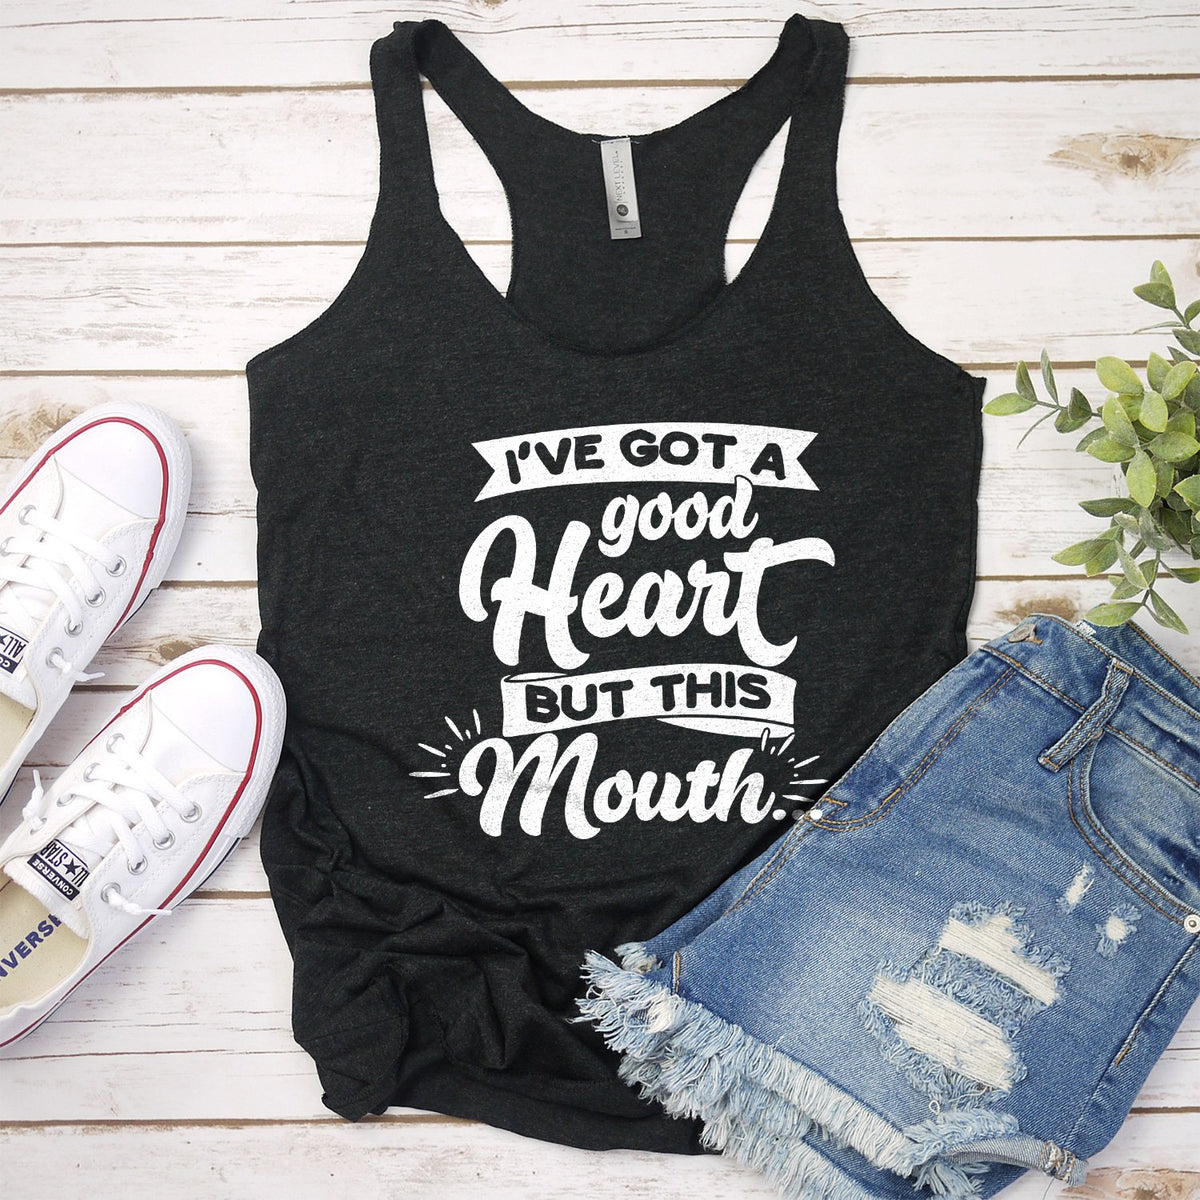 I&#39;ve Got A Good Heart But This Mouth - Tank Top Racerback